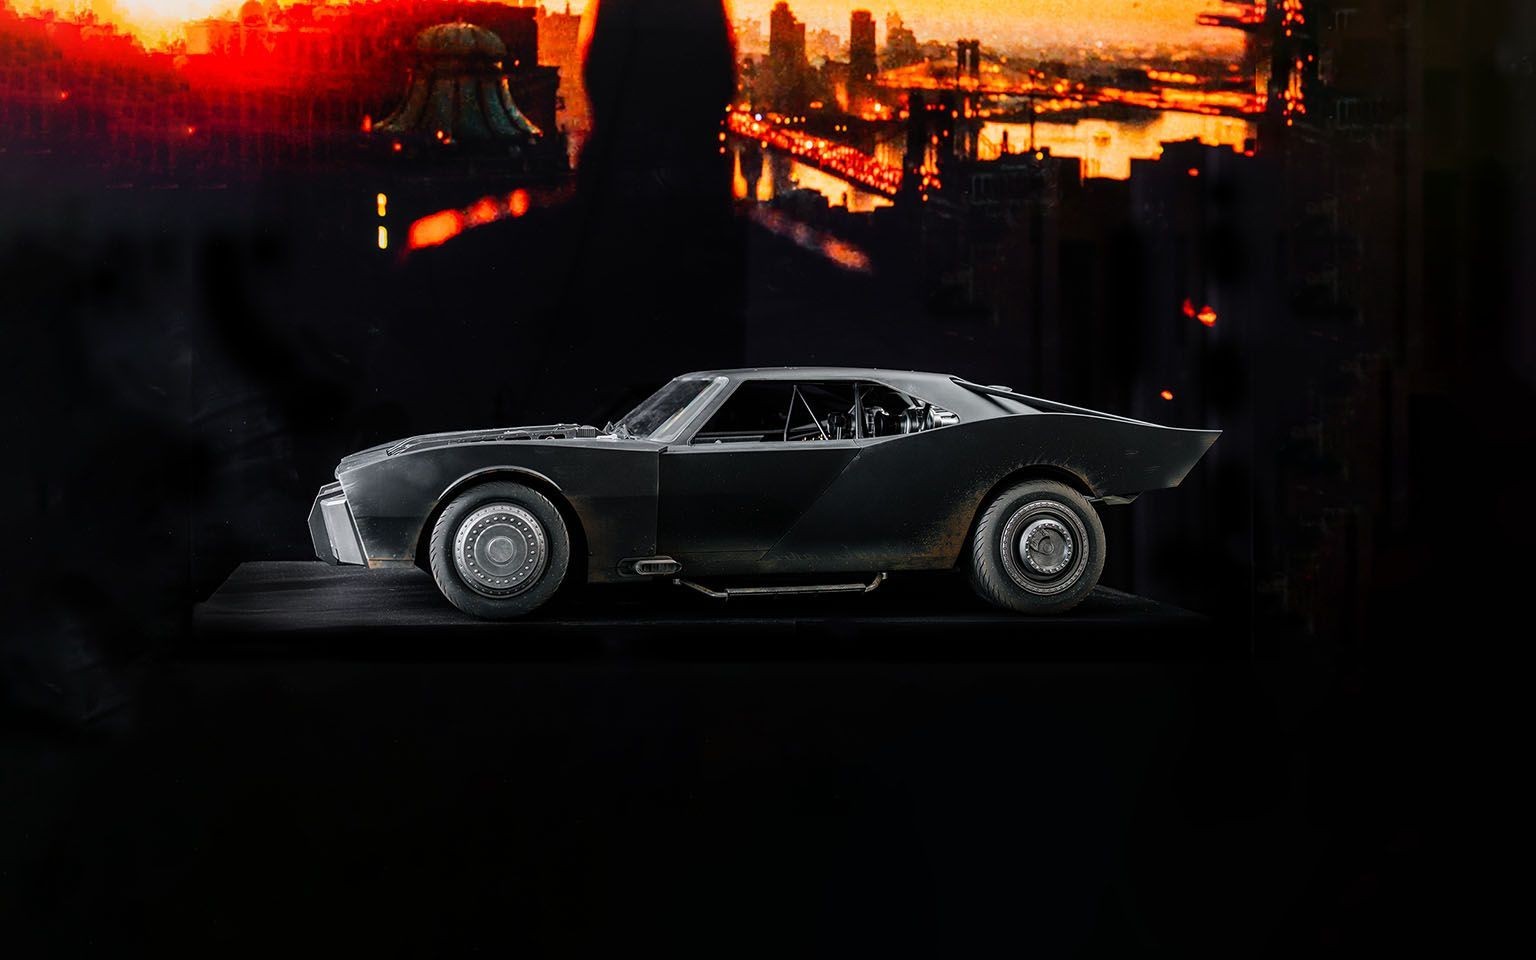 Limited Edition 1/6 Scale Batmobile From The Batman